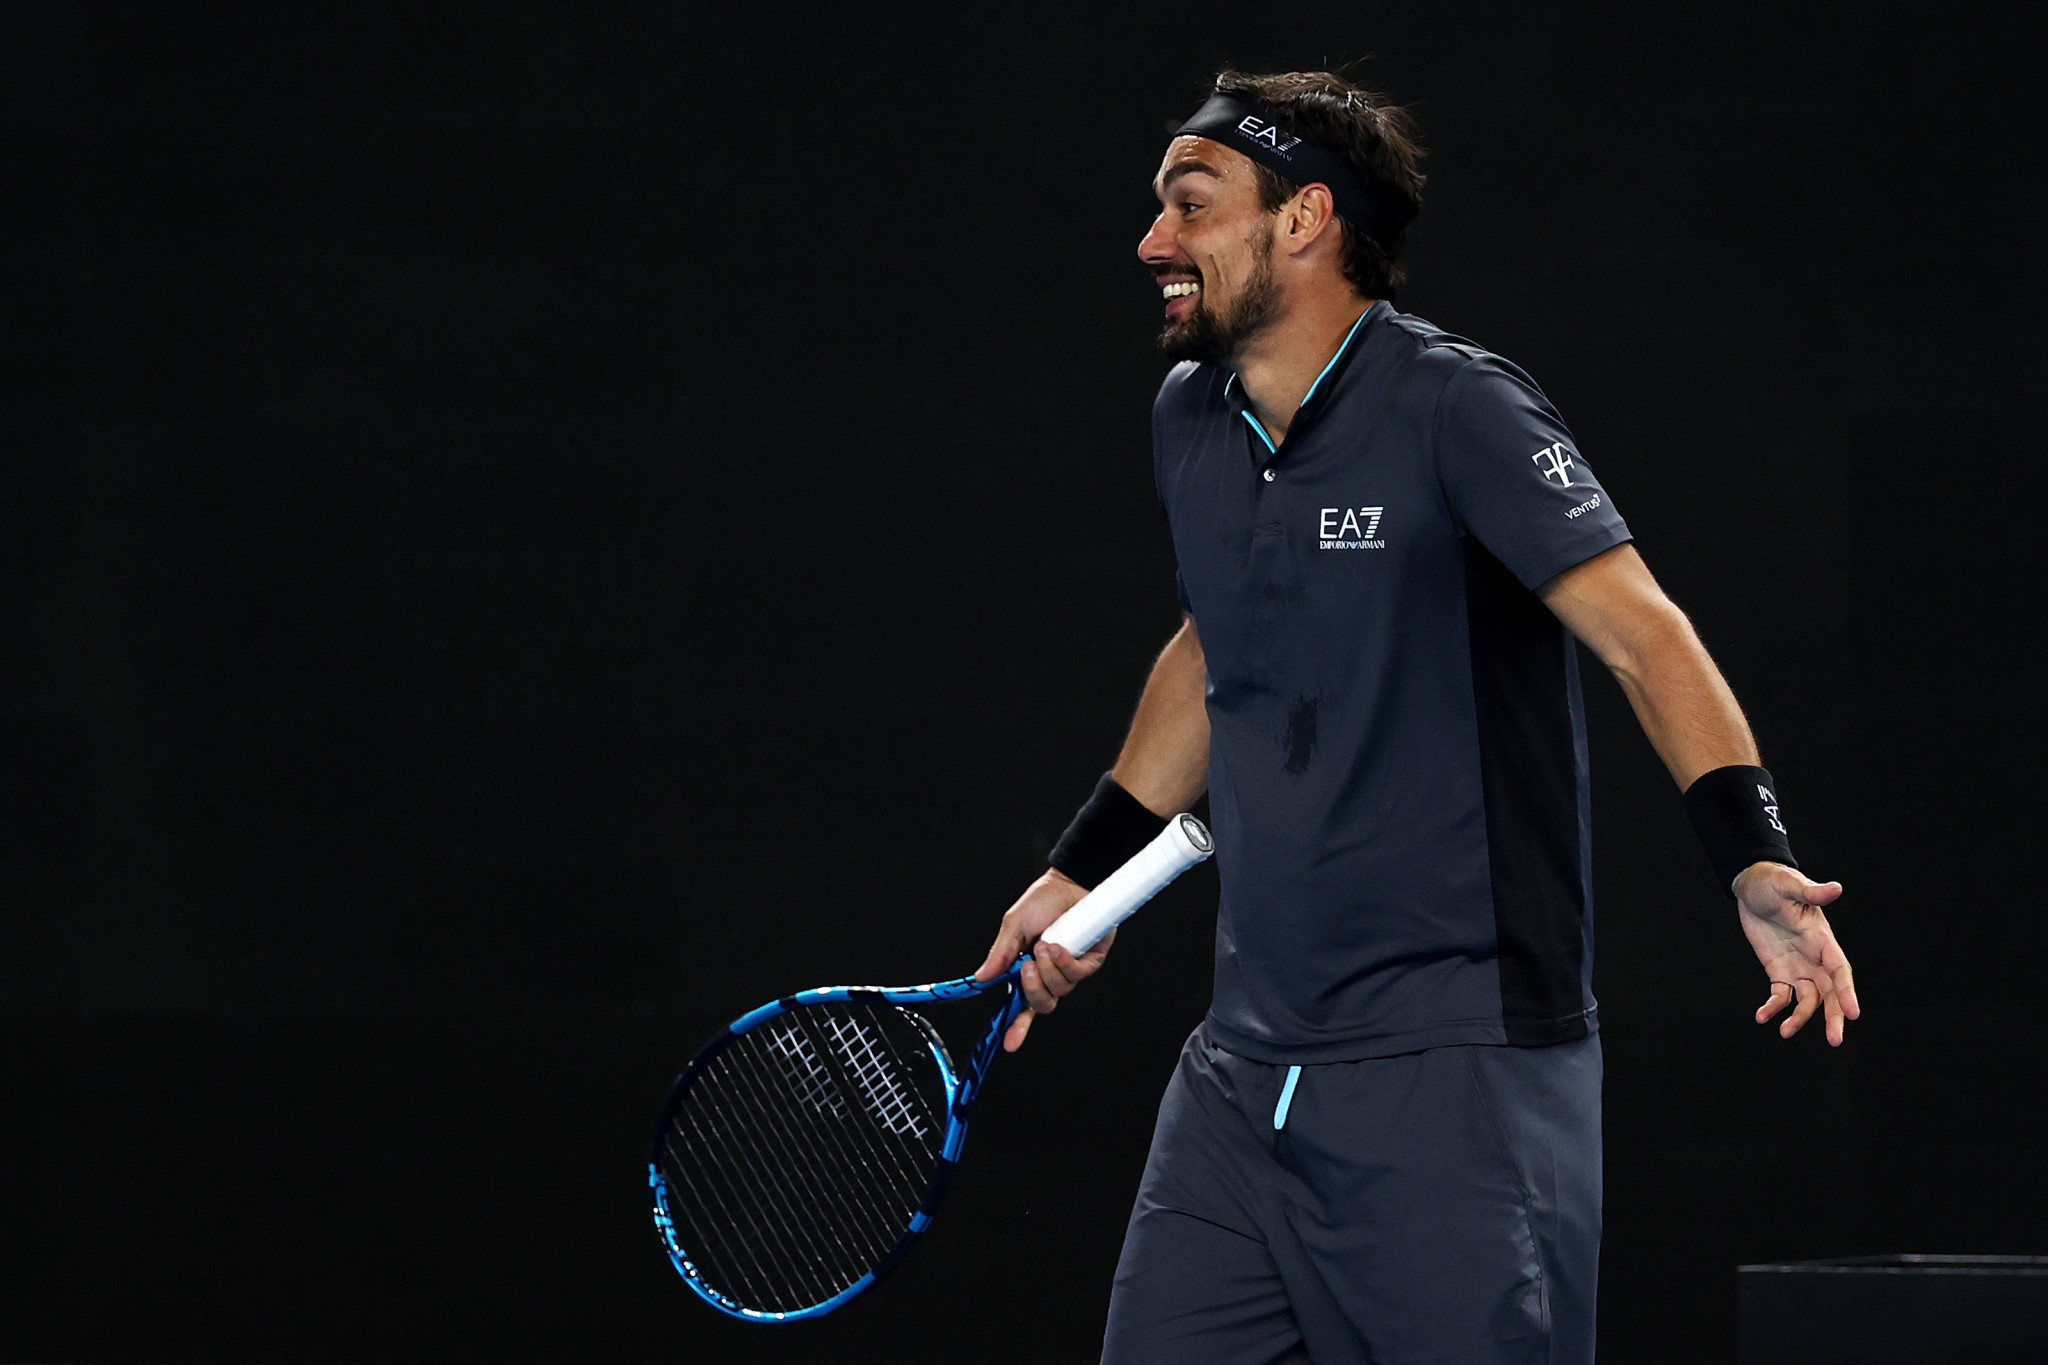 Italian Fabio Fognini was all smiles as he saw off Australian Alex de Minaur 6-4, 6-3, 6-4 to set up a meeting with Nadal ©Getty Images